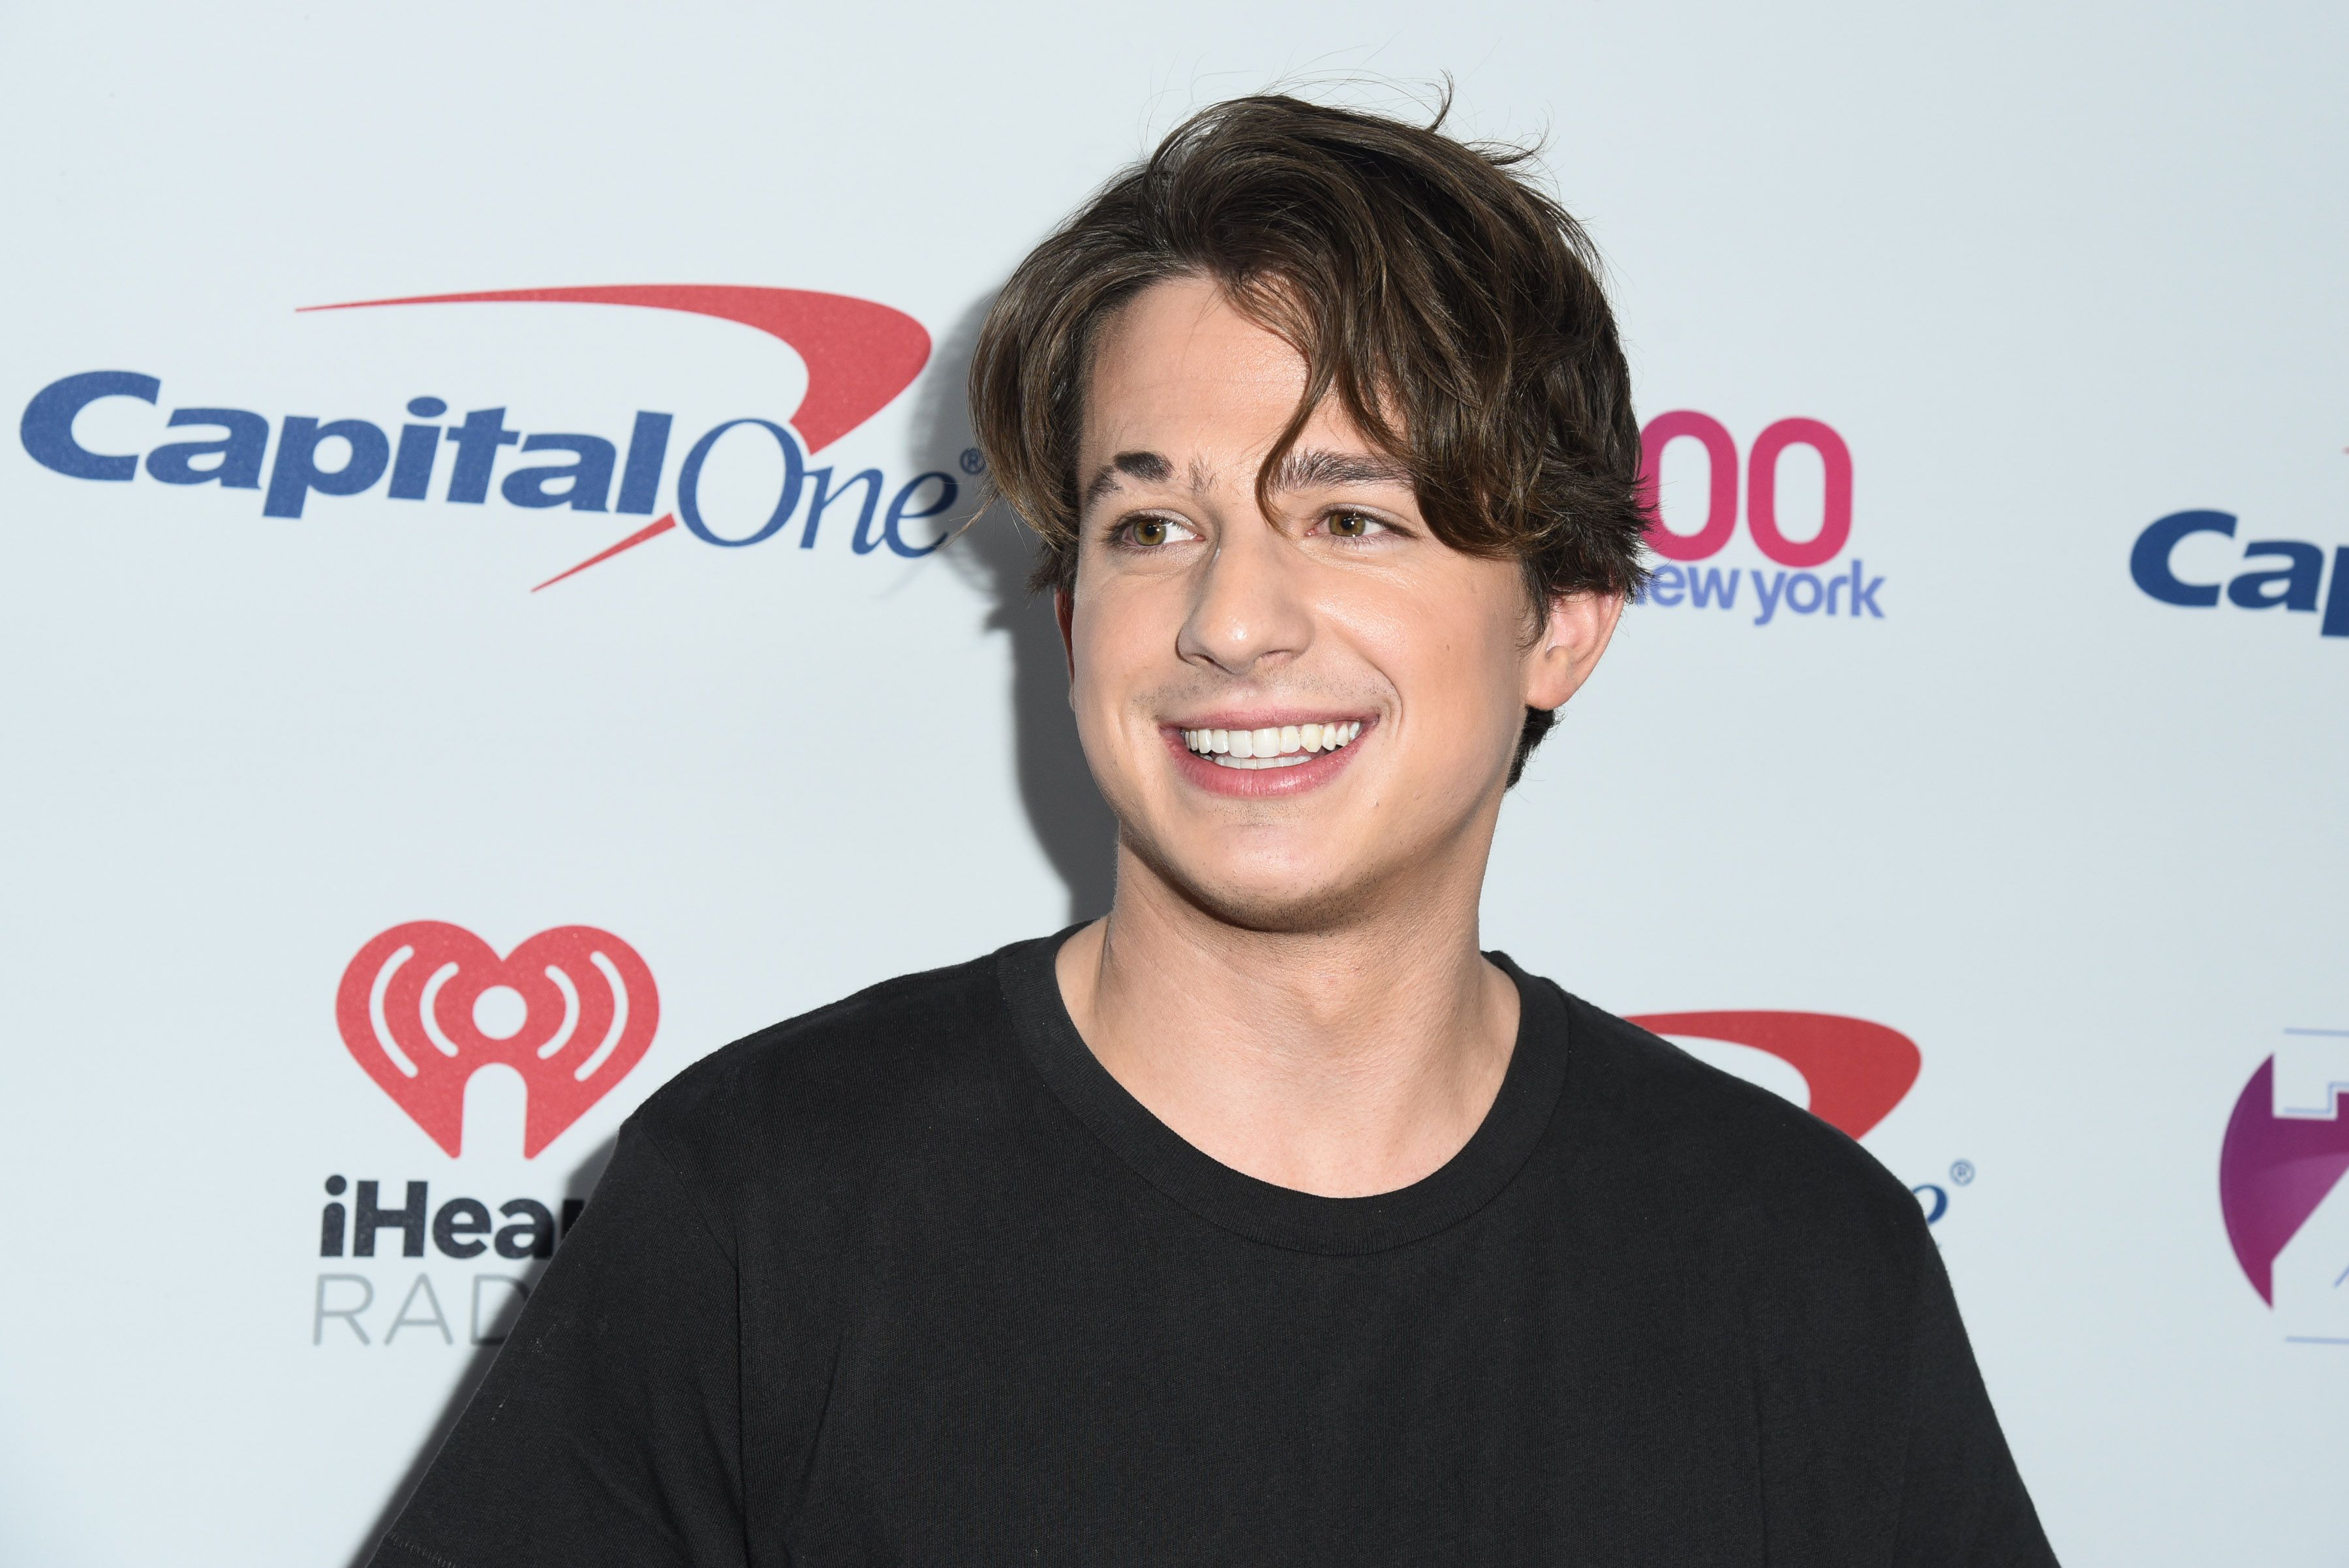 When bae dresses up😏😍 | Charlie puth, Charlie puth hairstyle, Charlie